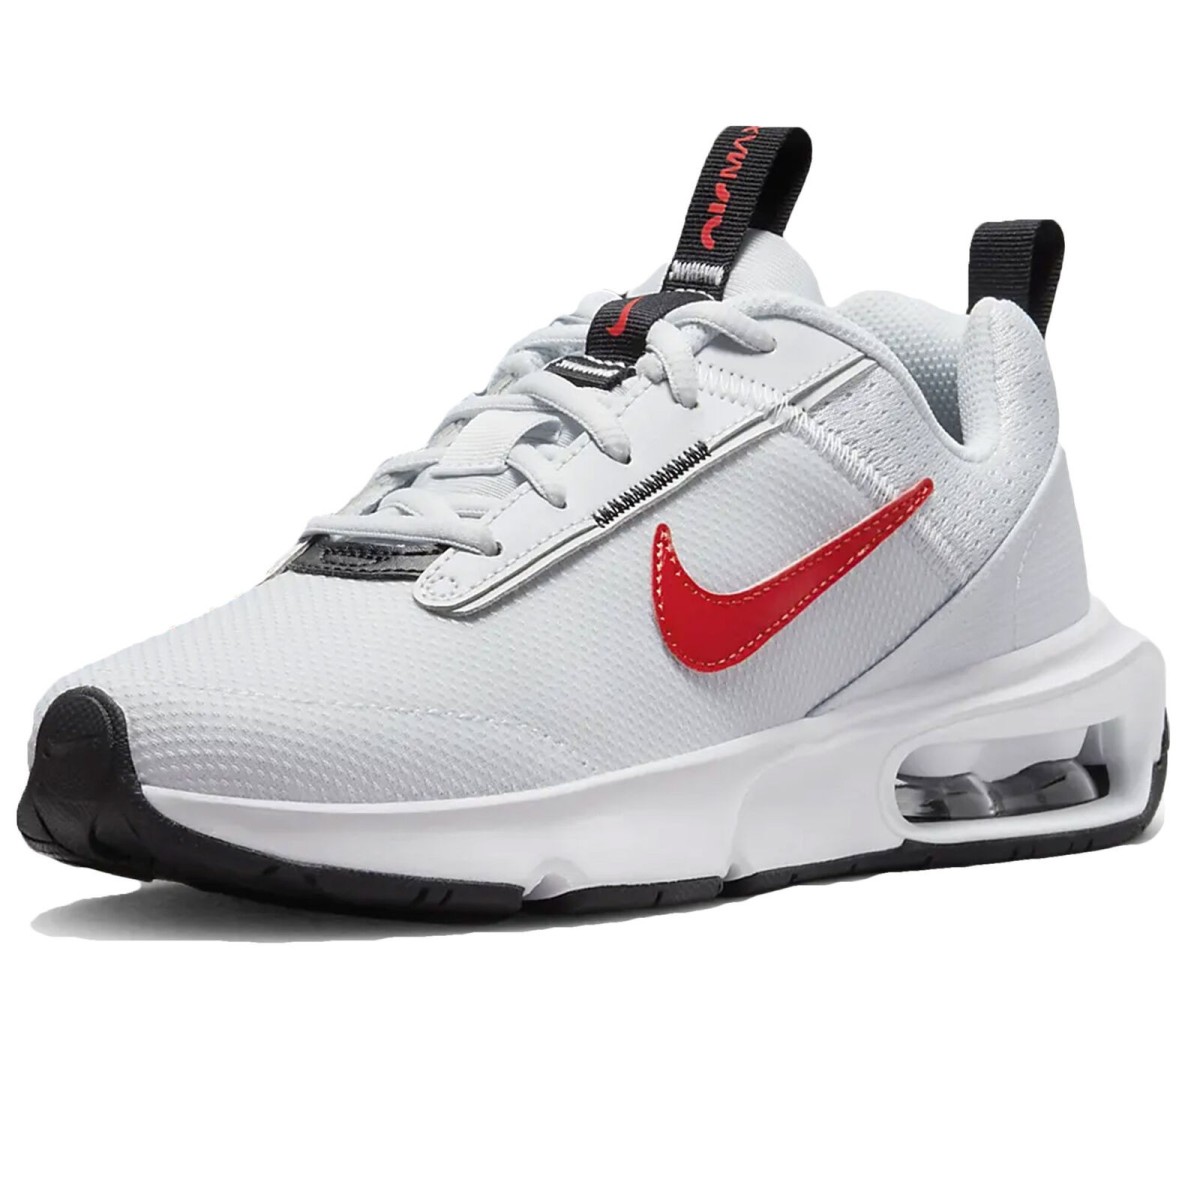 Shoes NIKE AIR MAX INTRLK LITE (GS) DH9393 004 pure platinum/habanero red | Sneaker low